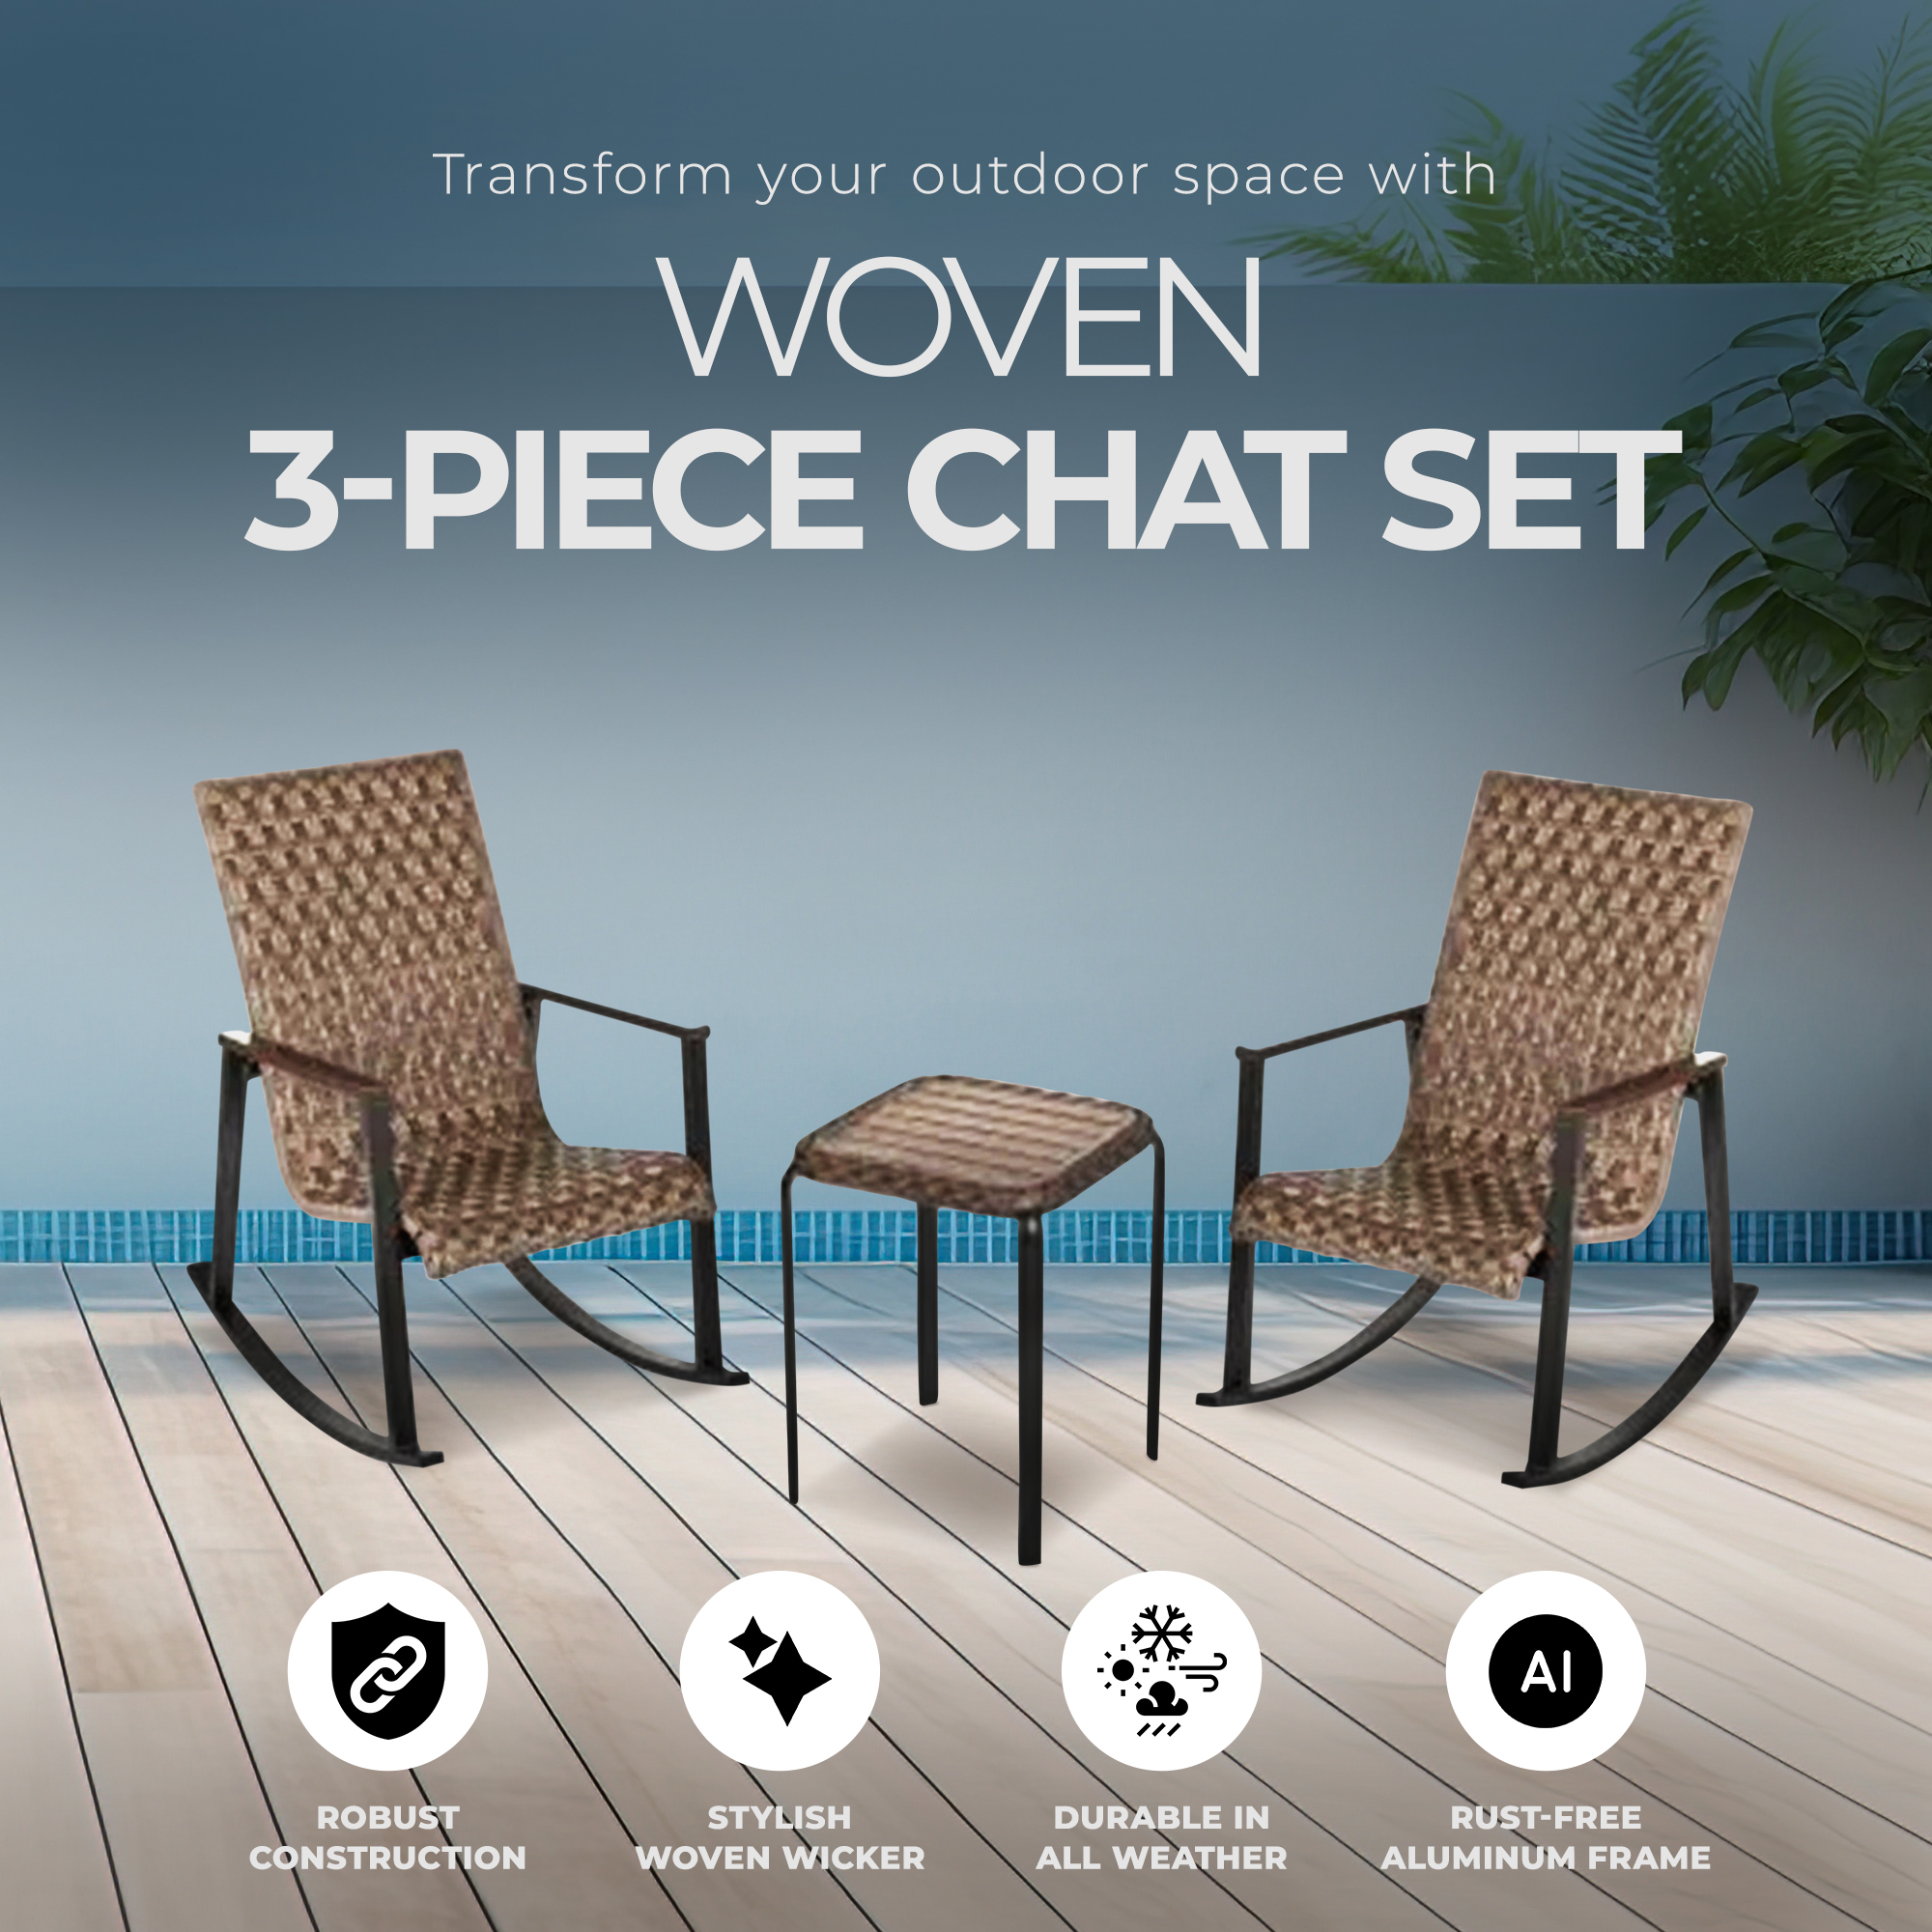 Four Seasons Courtyard Bayside 3 Piece All Weather Woven Wicker Chat Set - image 2 of 7